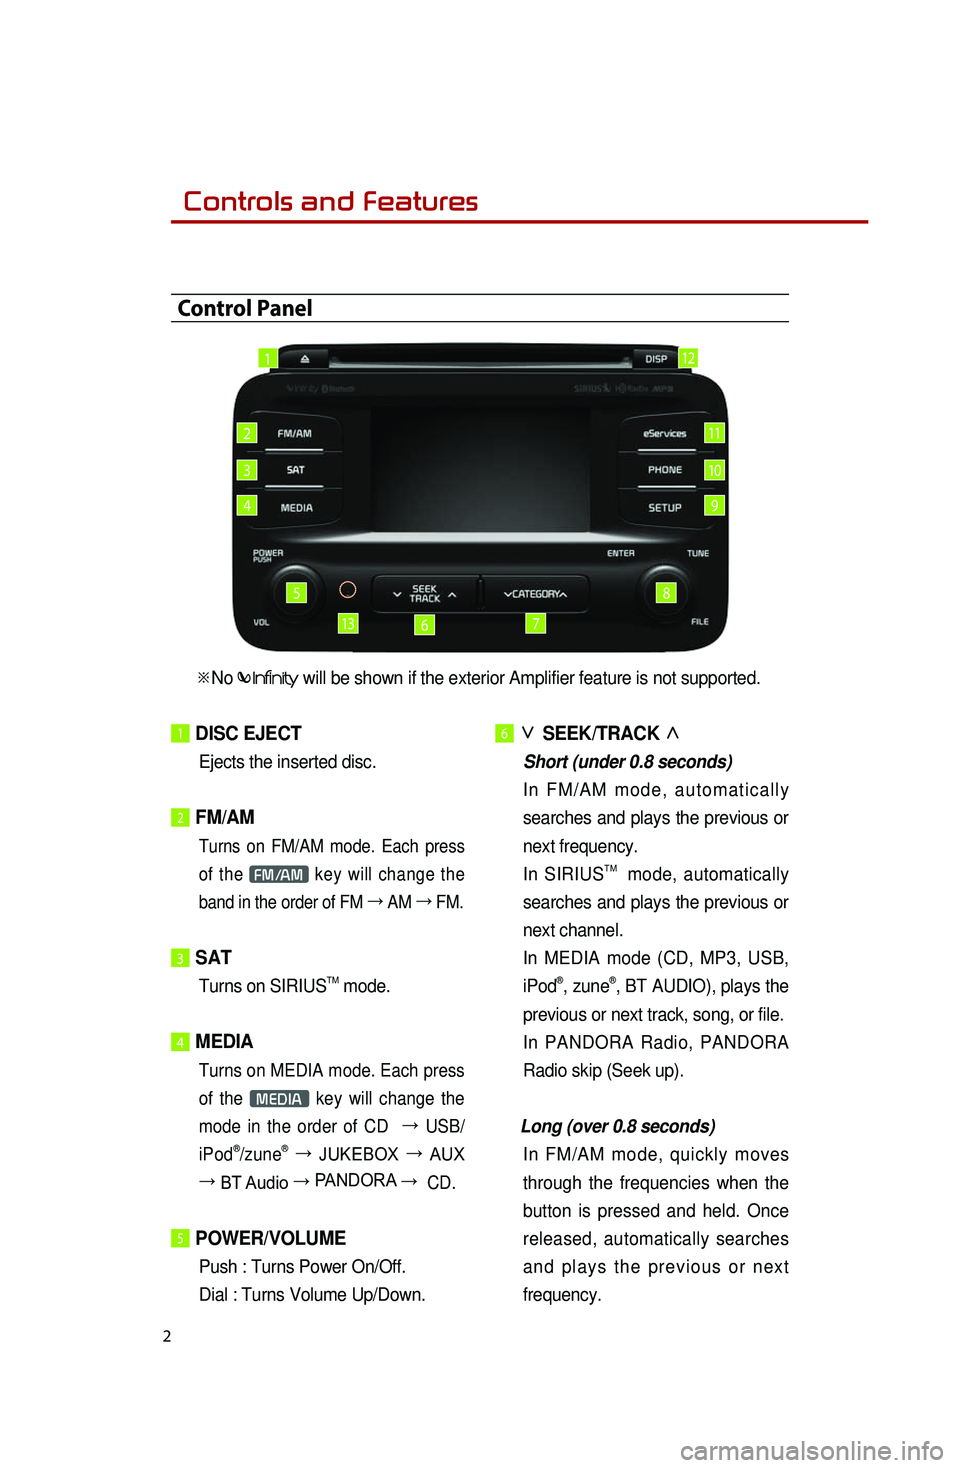 KIA OPTIMA 2014  Quick Reference Guide  Controls and Features 
2
1 DISC EJECT
Ejects the inserted disc.
 
2 FM/AM
 Turns  on  FM/AM  mode.  Each  press 
of  the FM/AM  key  will  change  the 
band in the order of FM  →
 AM  →
 FM.
3 SA